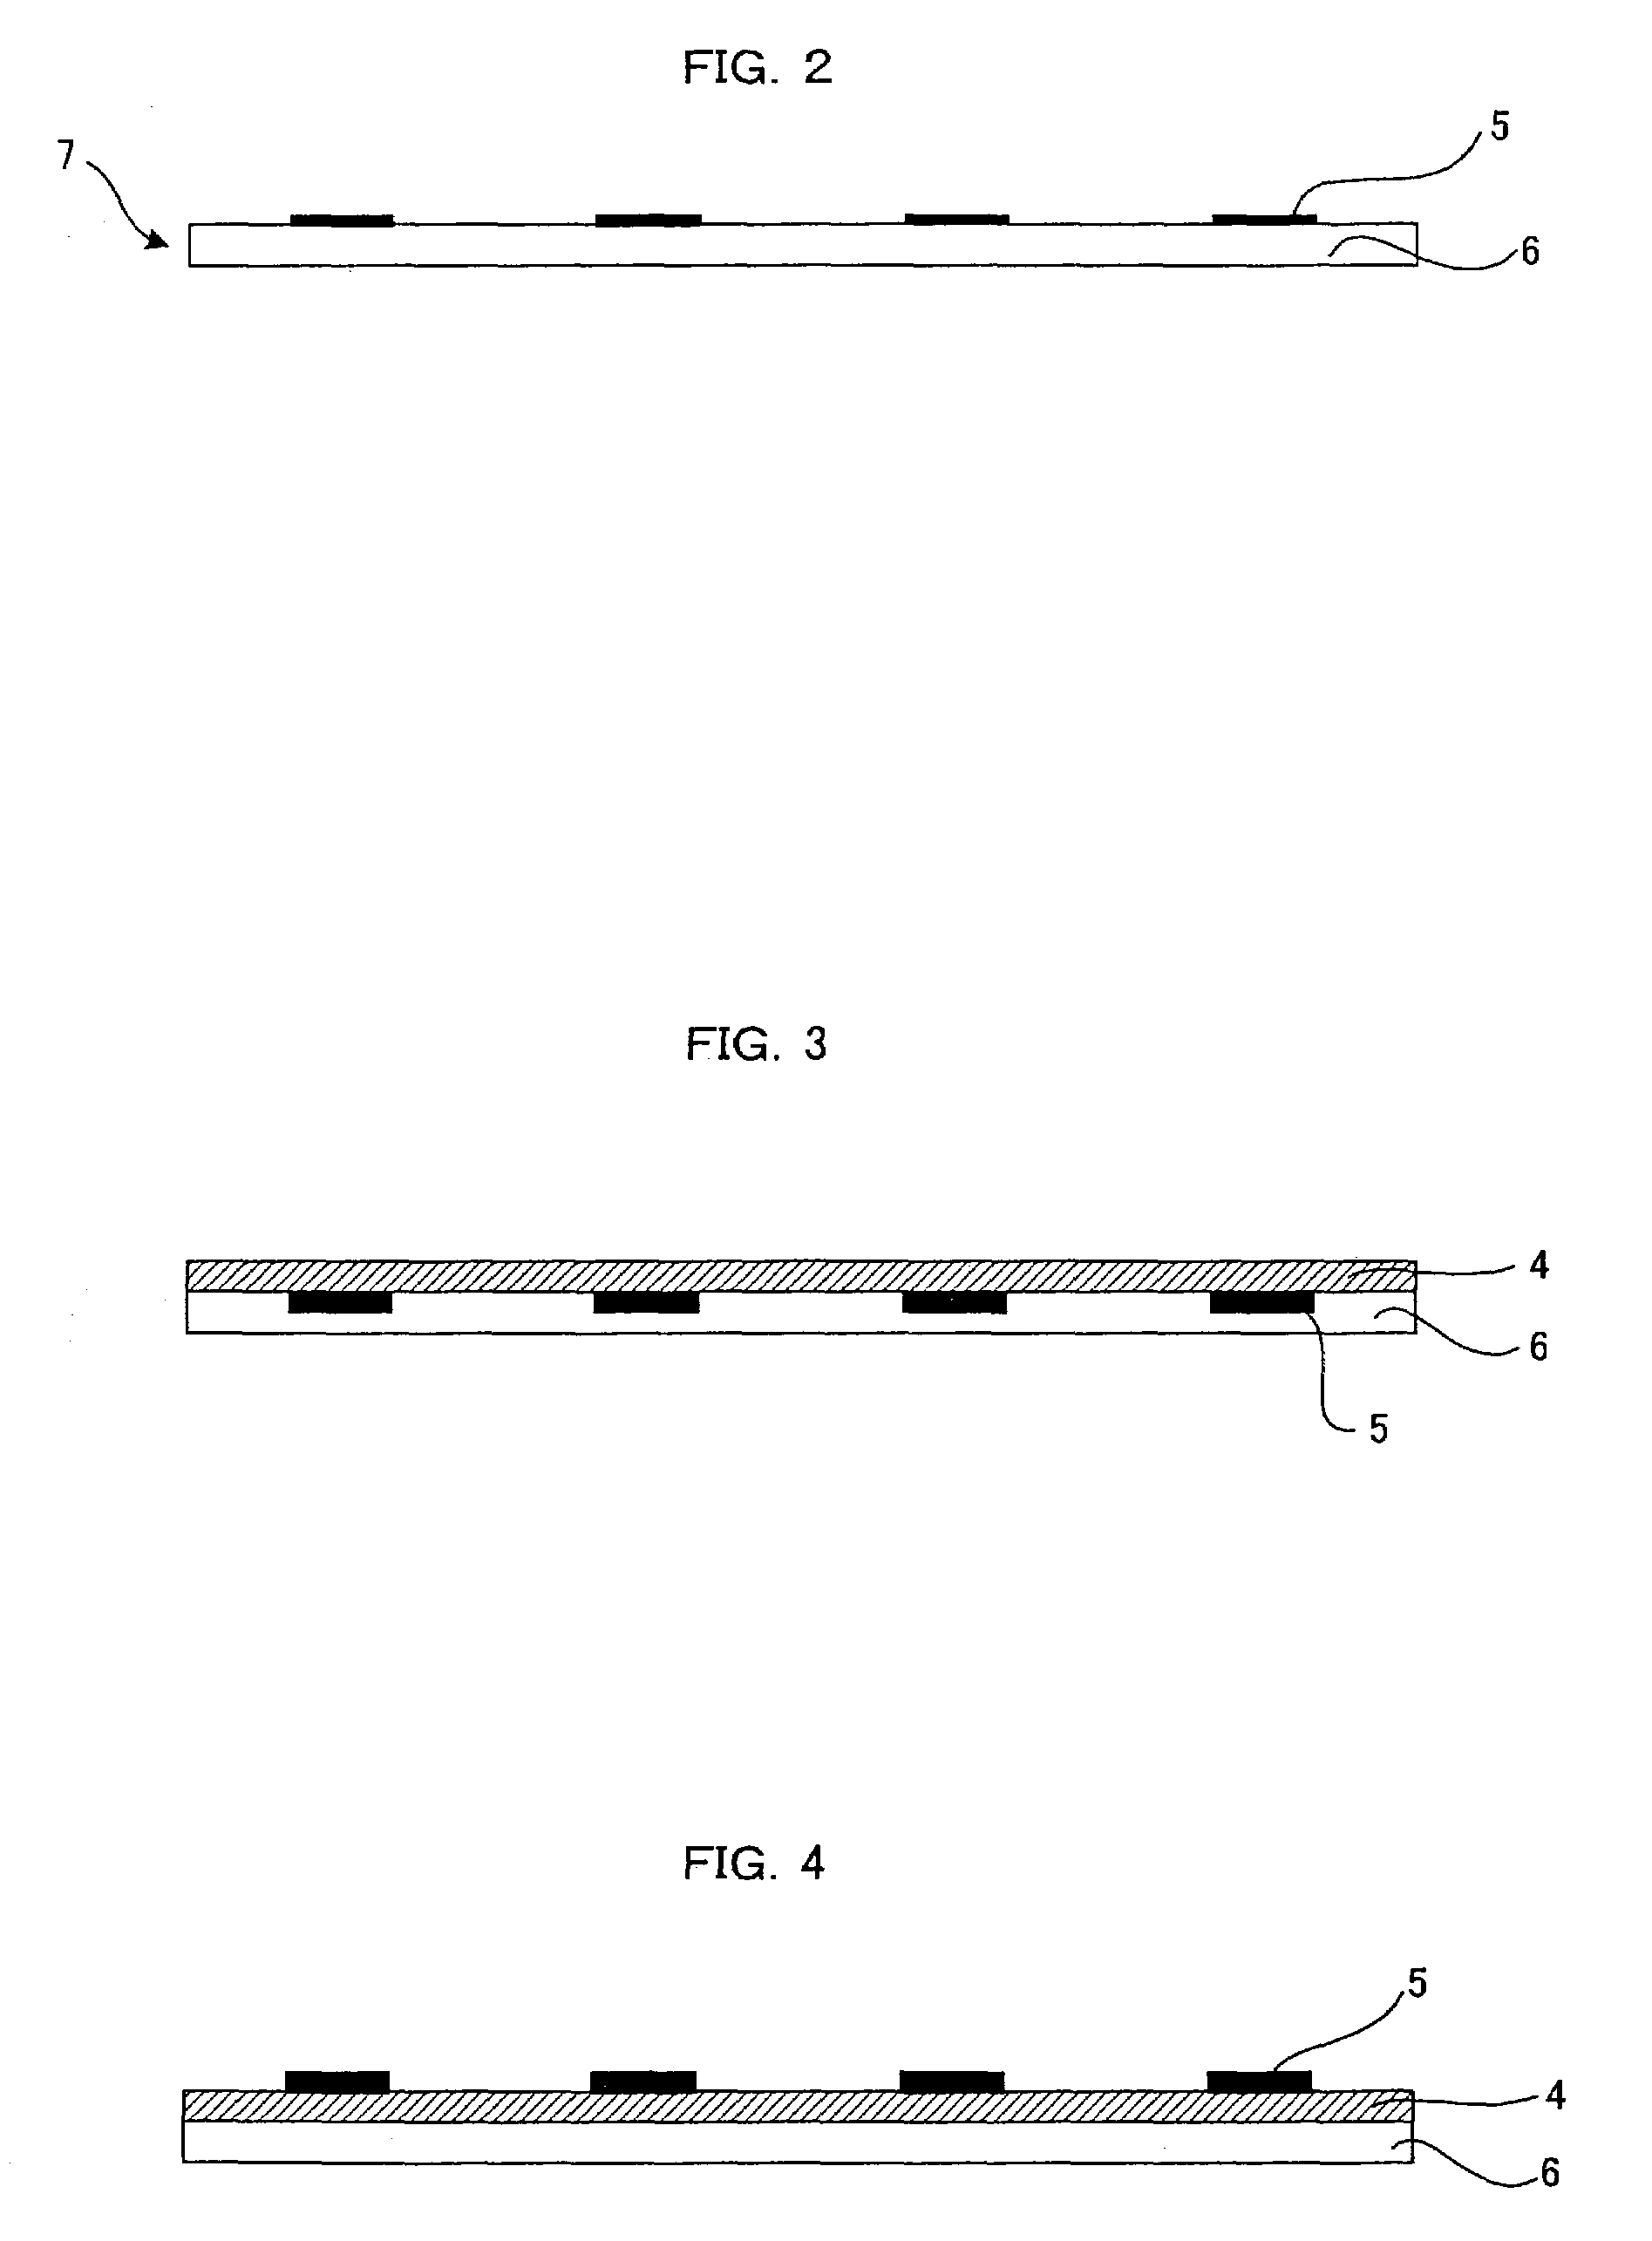 Methods for producing pattern-forming body